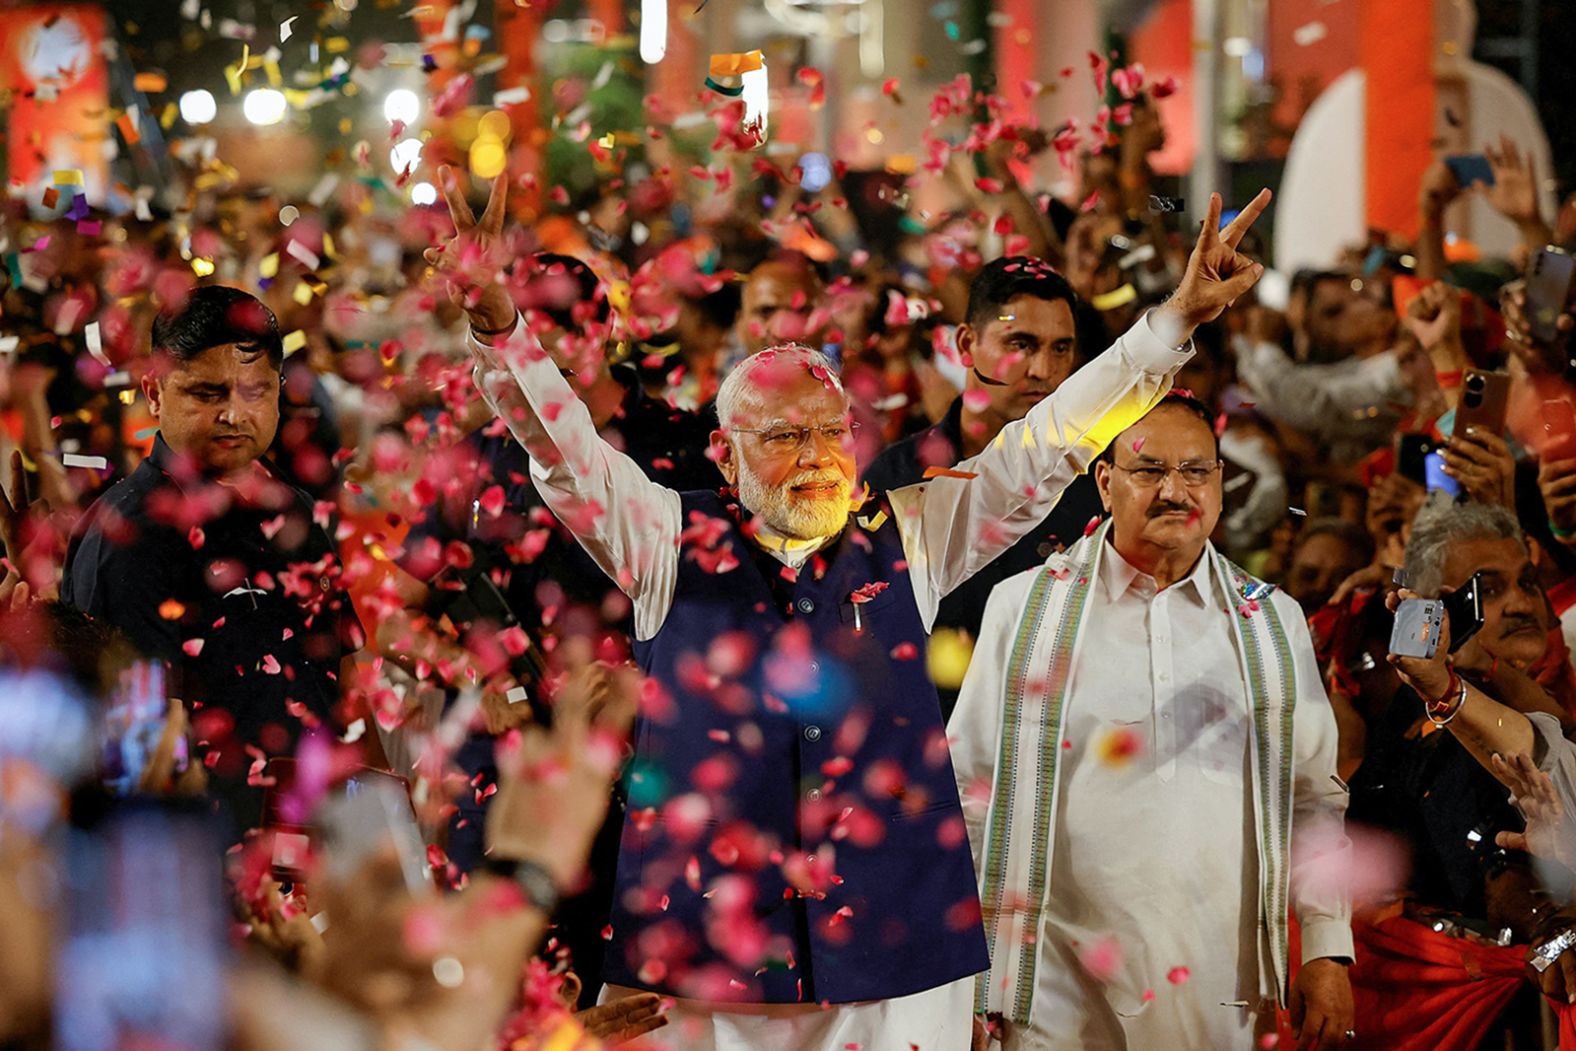 Indian Prime Minister Narendra Modi gestures as he arrives at Bharatiya Janata Party (BJP) headquarters in New Delhi, on June 4. Modi's victory makes him the first leader since India's founding Prime Minister Jawaharlal Nehru to secure a third five-year term.